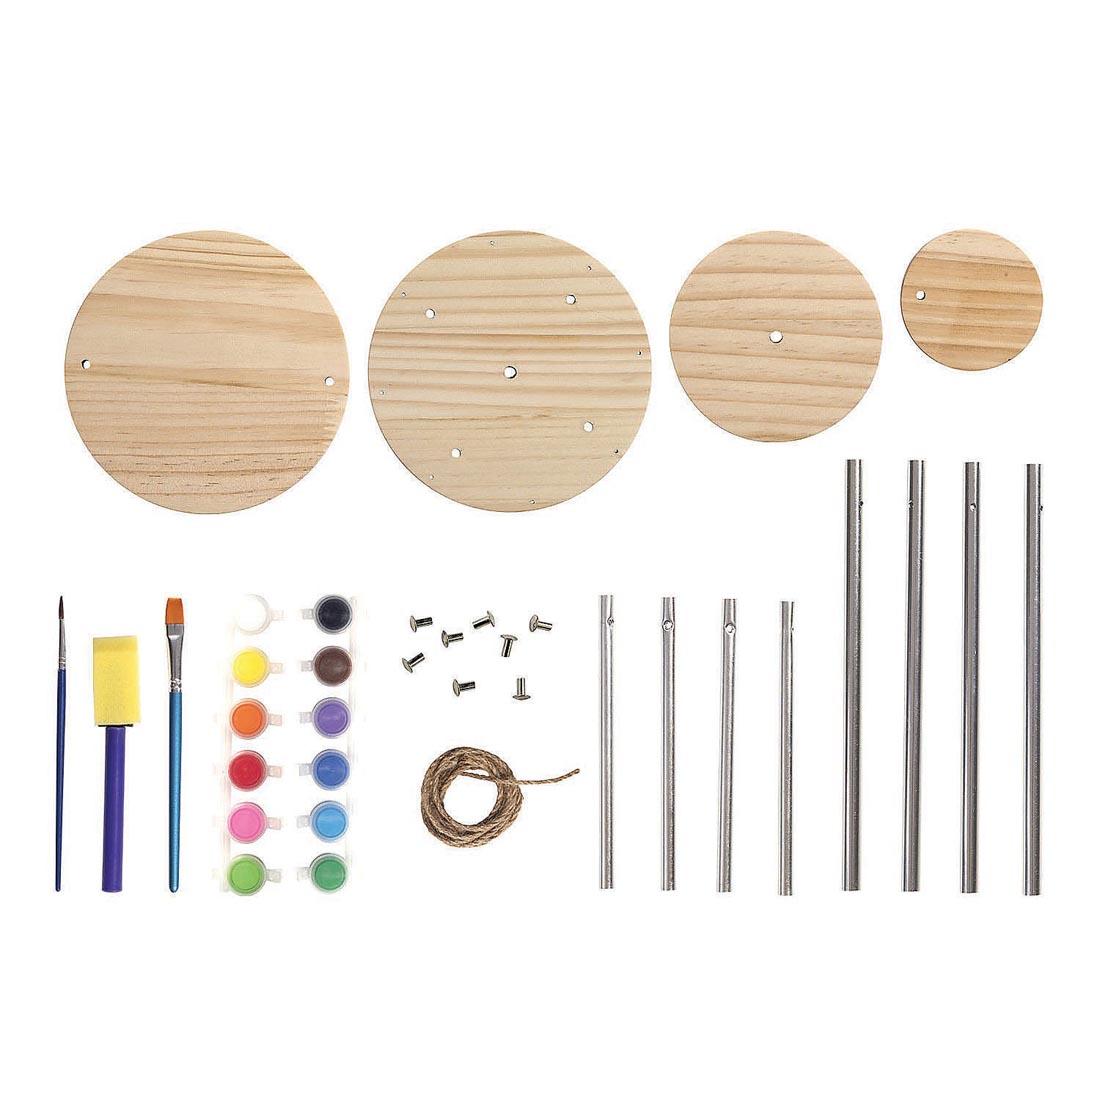 Components of the Make Your Own Wind Chime Kit